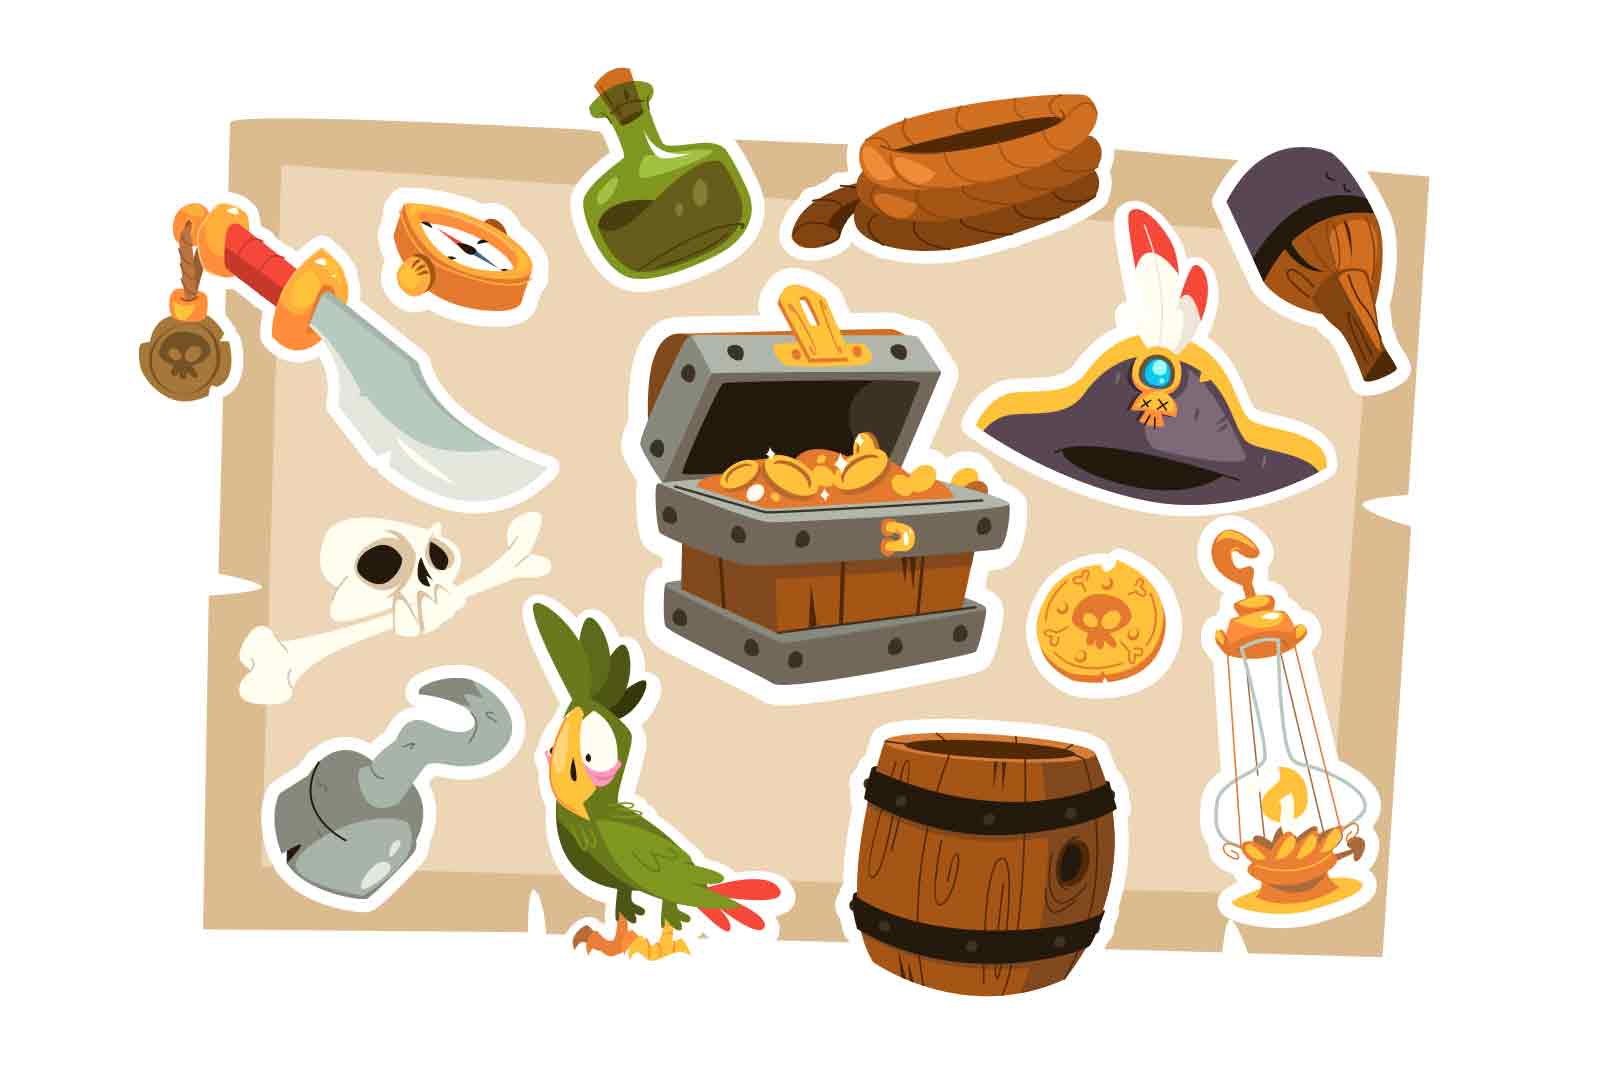 Pirate cartoon objects set vector illustration. Corsair, golden treasure chest, rum bottle and iron cannon. Sea adventure element collection